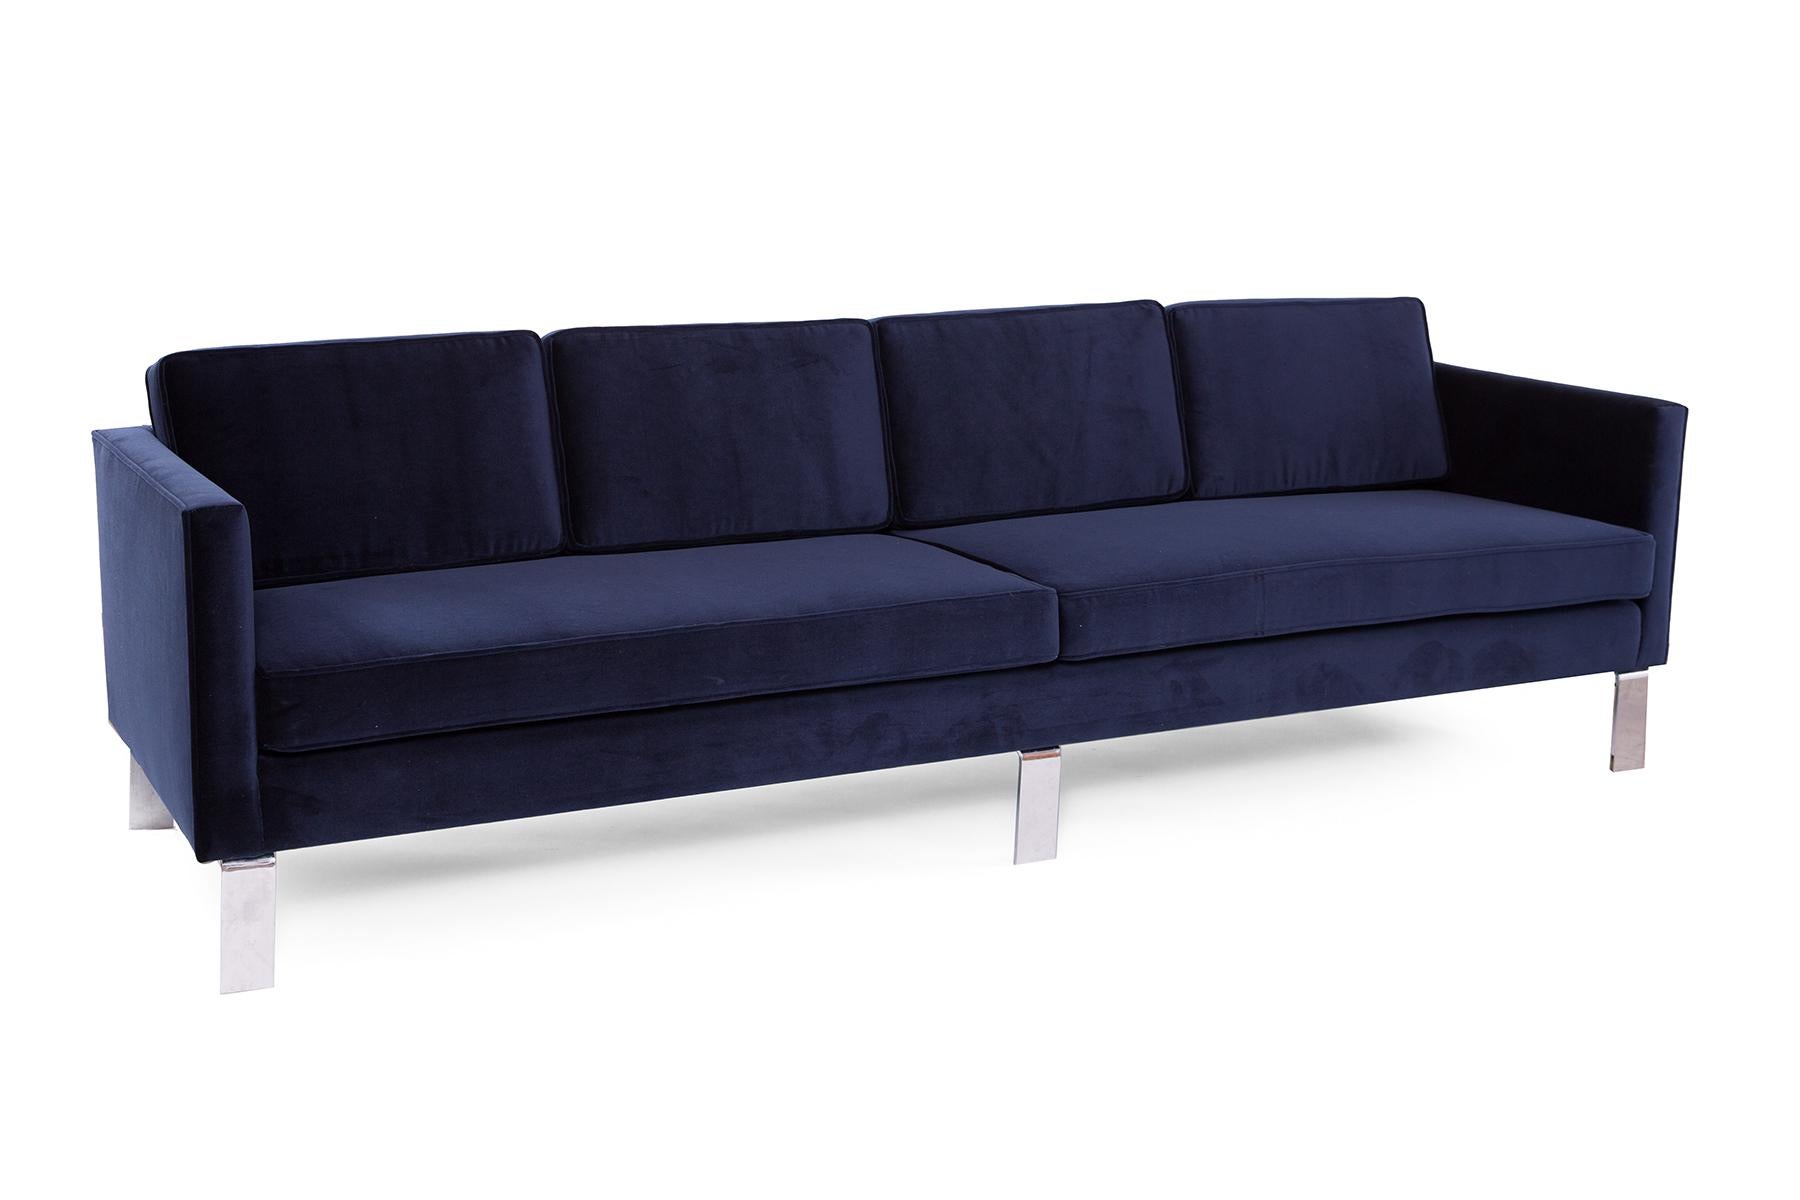 Martin Brattrud large scale navy mohair and mirror polished steel sofa circa mid-1970s. This example has been recently reupholstered.